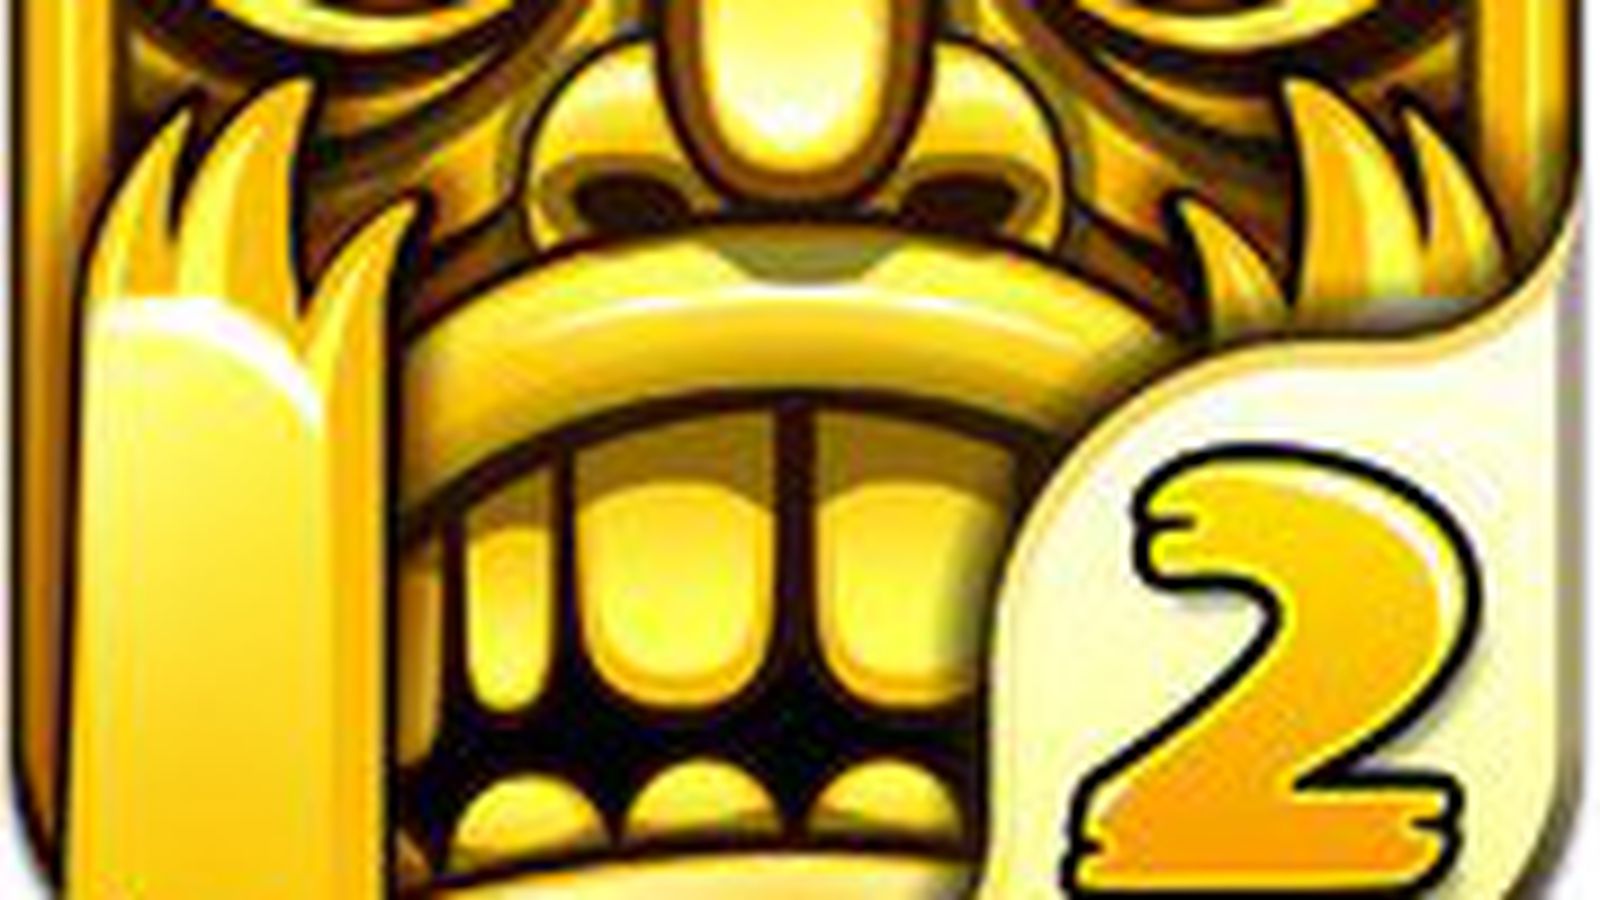 Temple Run 2 hits 50m downloads in under two weeks